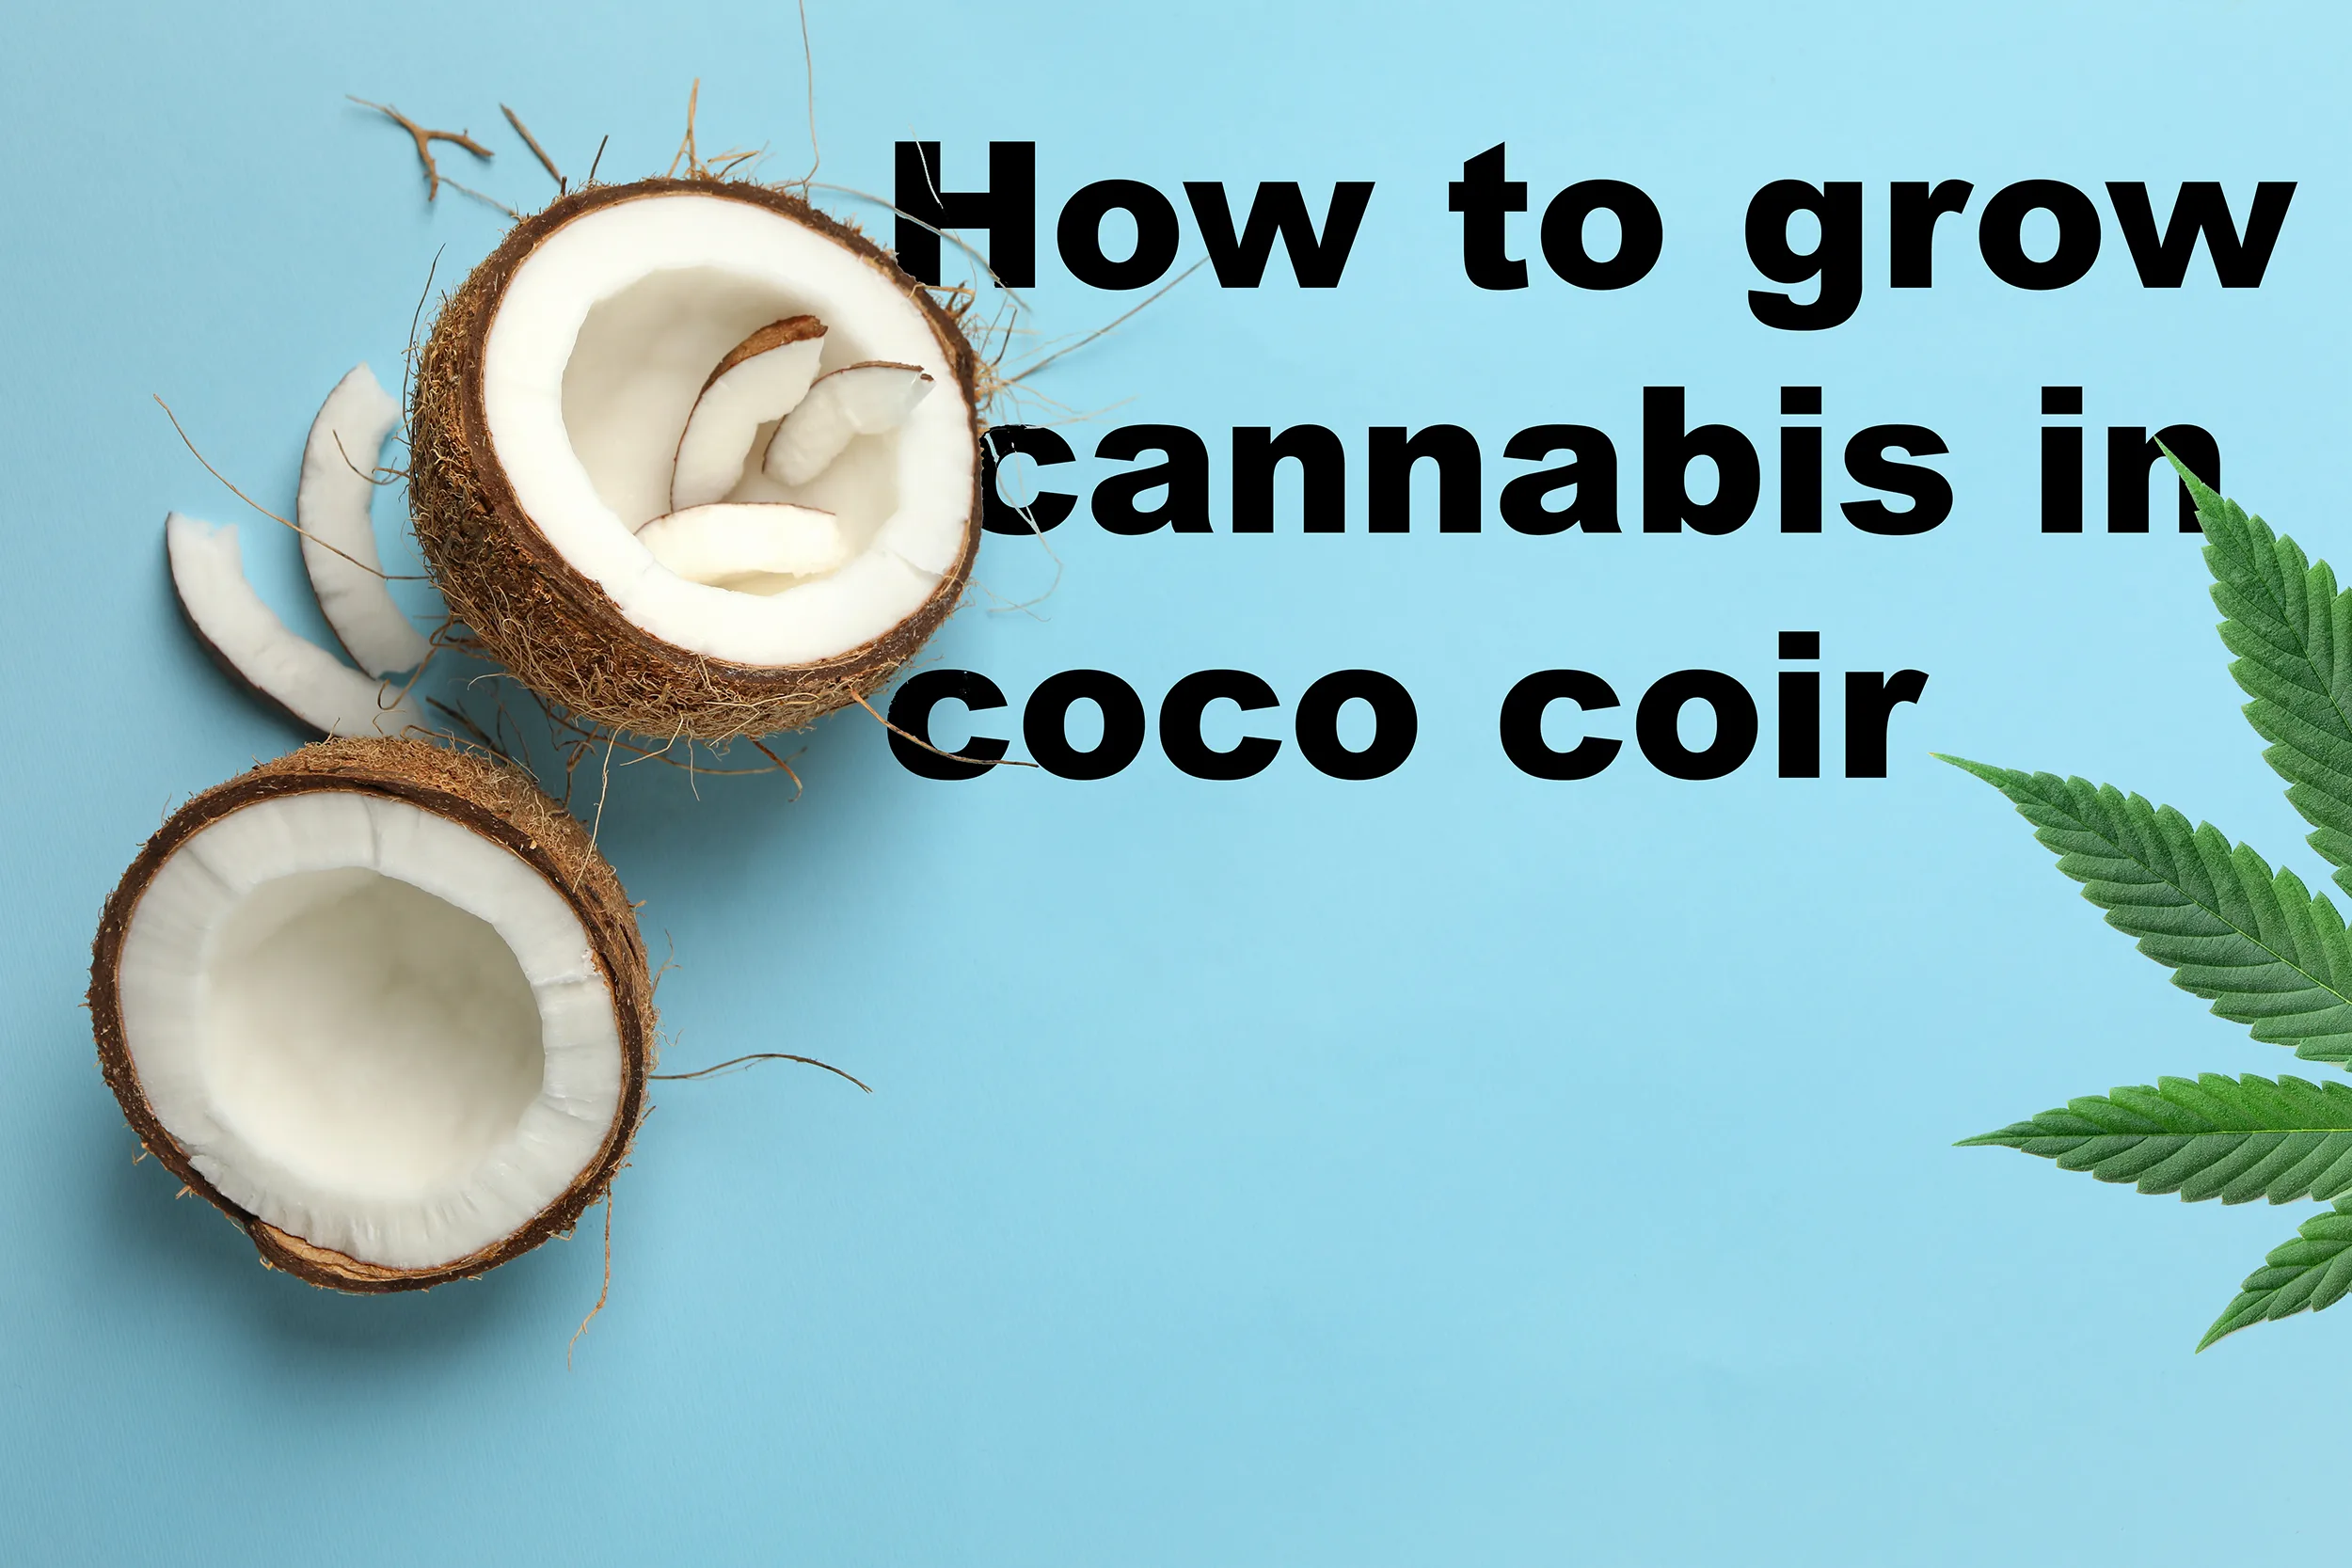 how to grow cannabis in coco coir title picture with coconuts and a pot leaf on a blue background